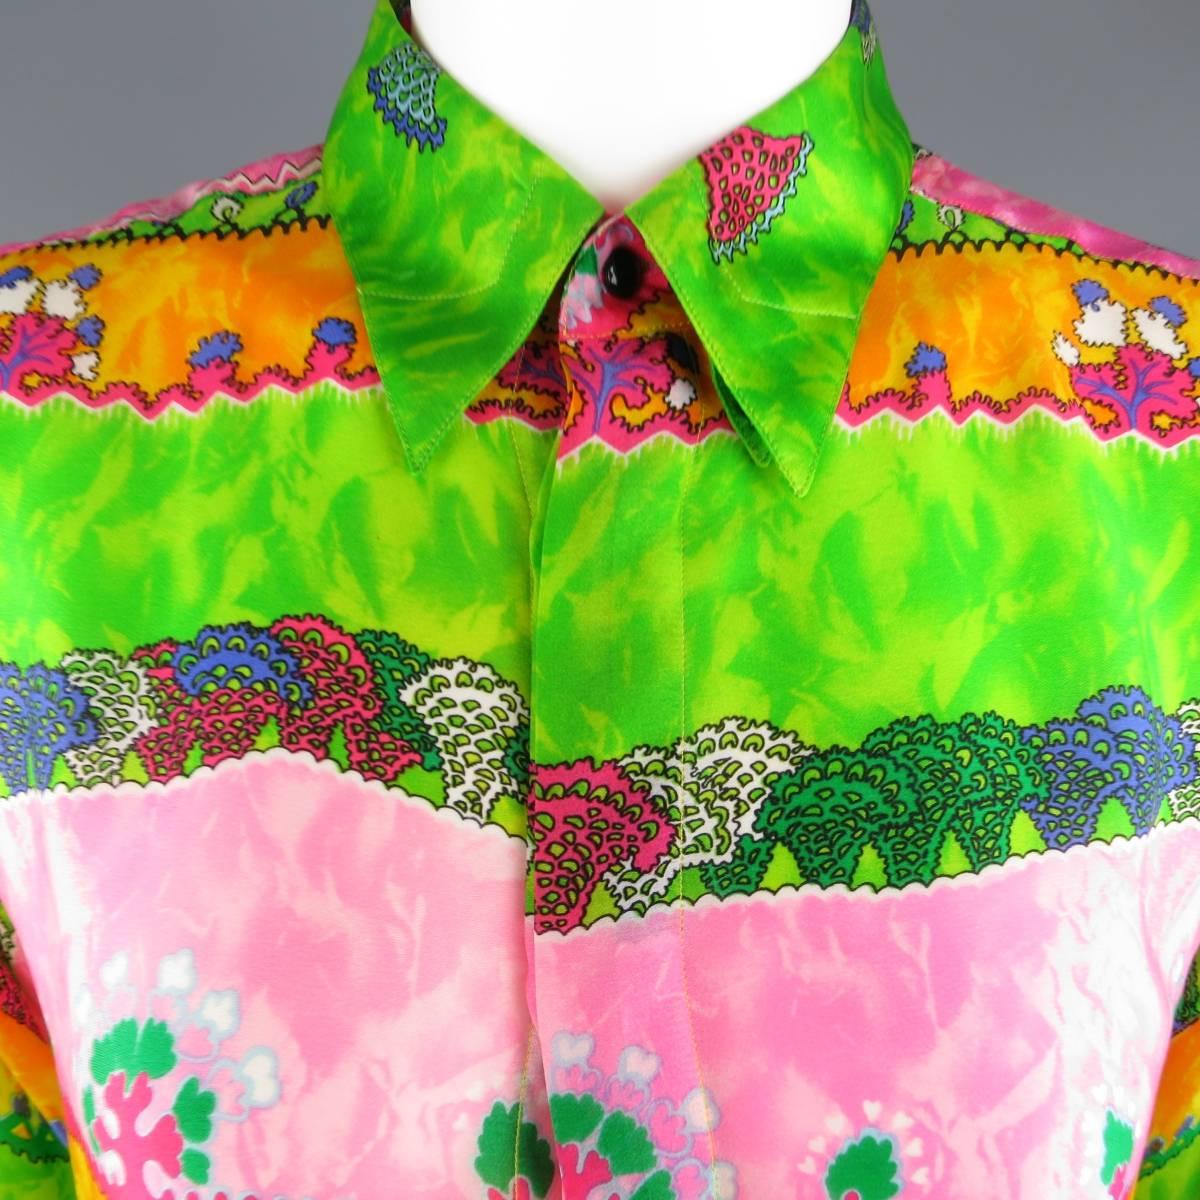 Vintage 1990's GIANNI VERSACE blouse comes in multi color silk with an all over abstract stripe print with hues of green, yellow gold, and pink featuring a pointed collar, oversized fit, and hidden placket closure. Made in Italy.
 
Excellent